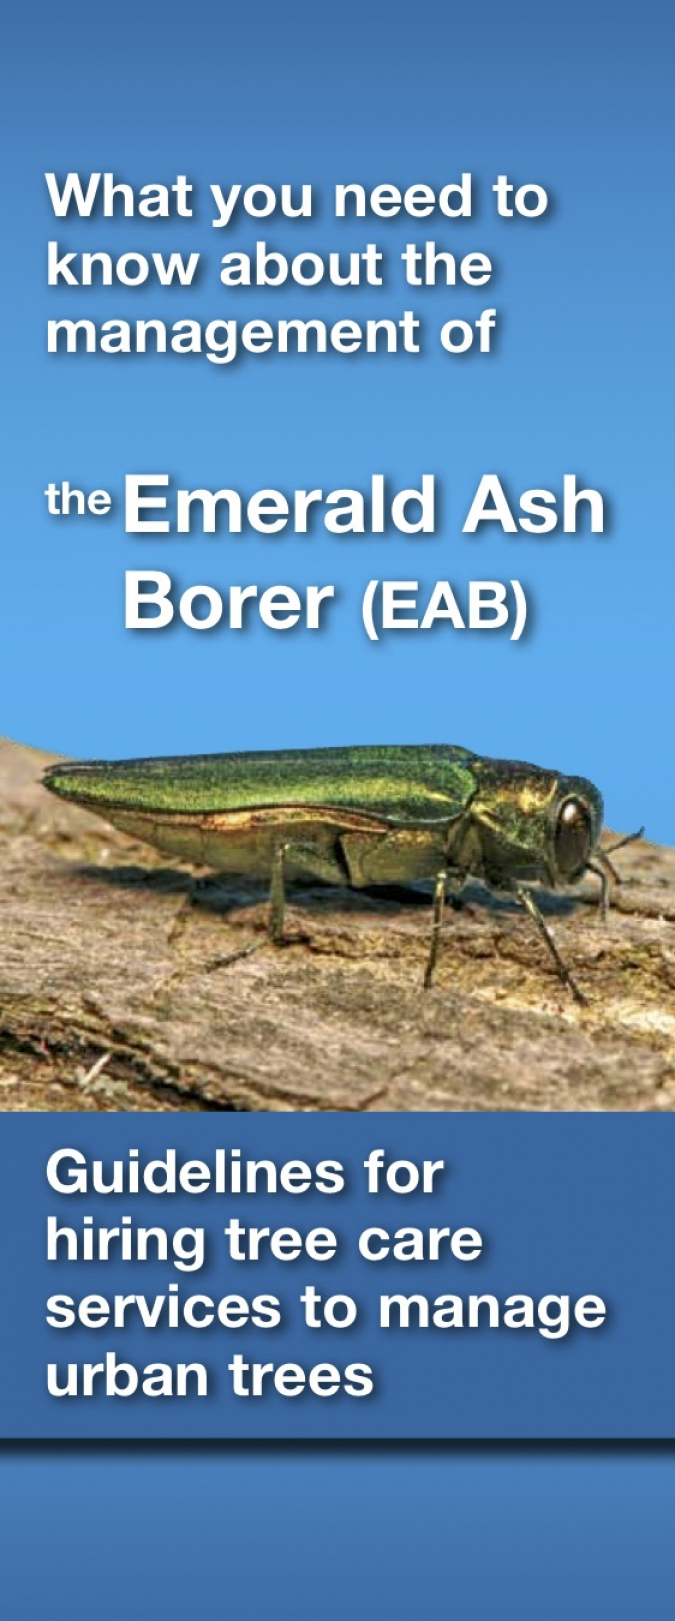 What you need to know about the management of the Emerald Ash Borer